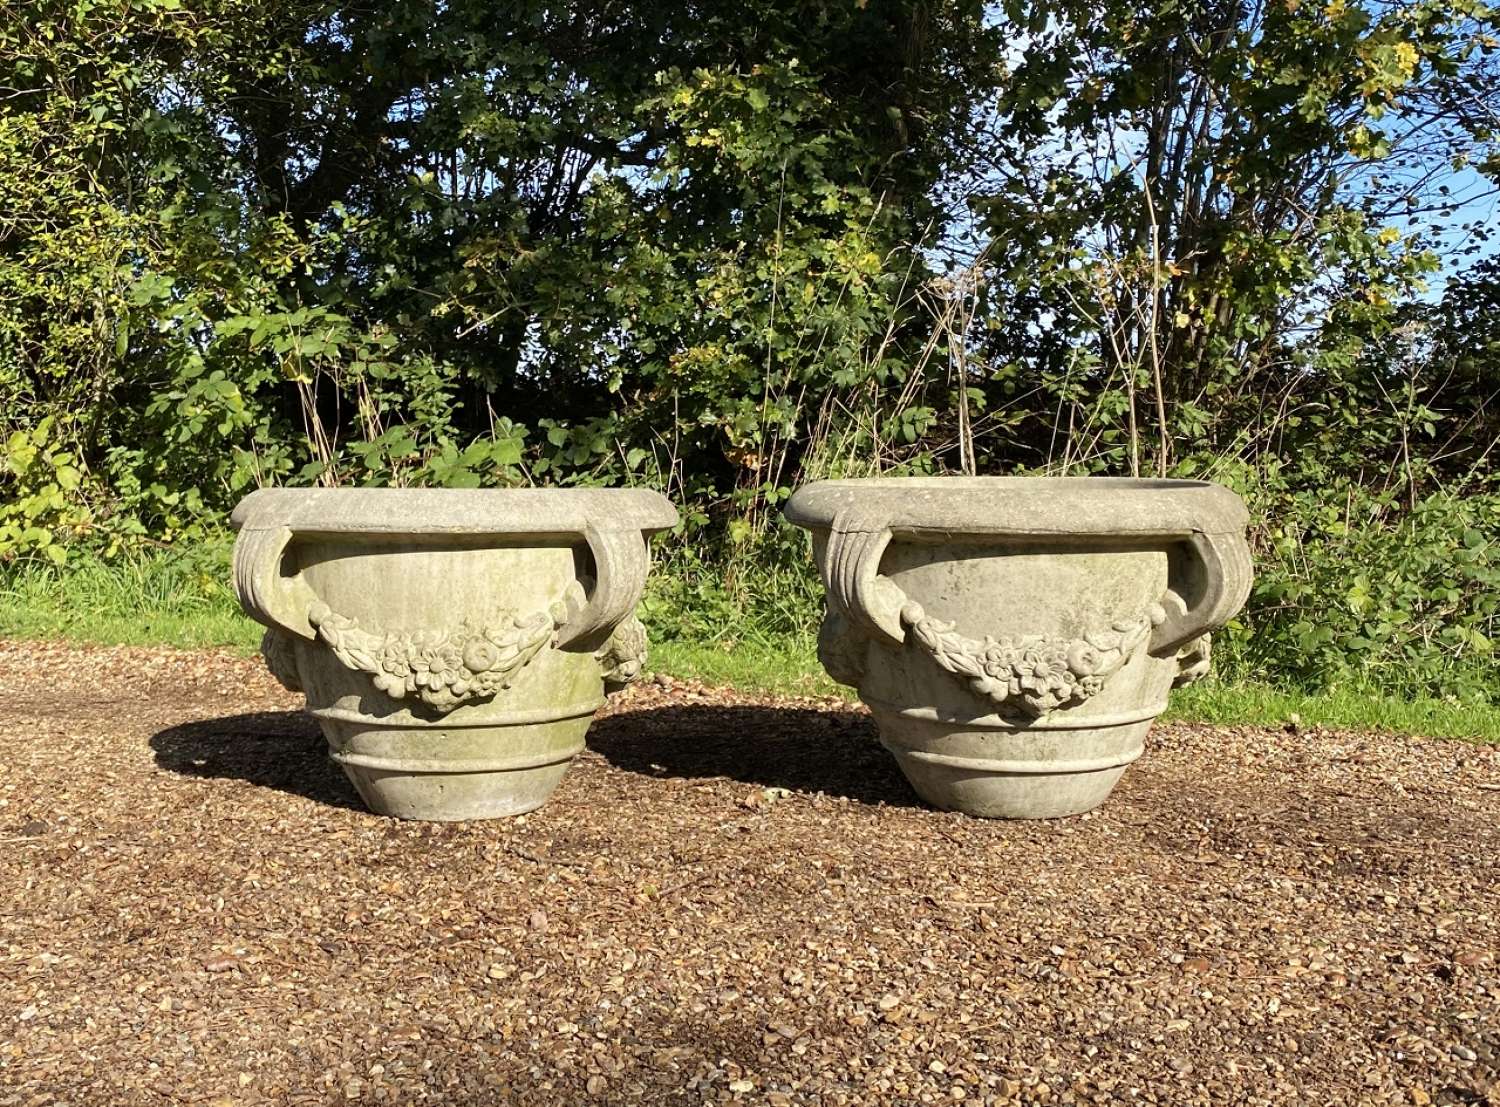 Pair of Garland Planters with Handles